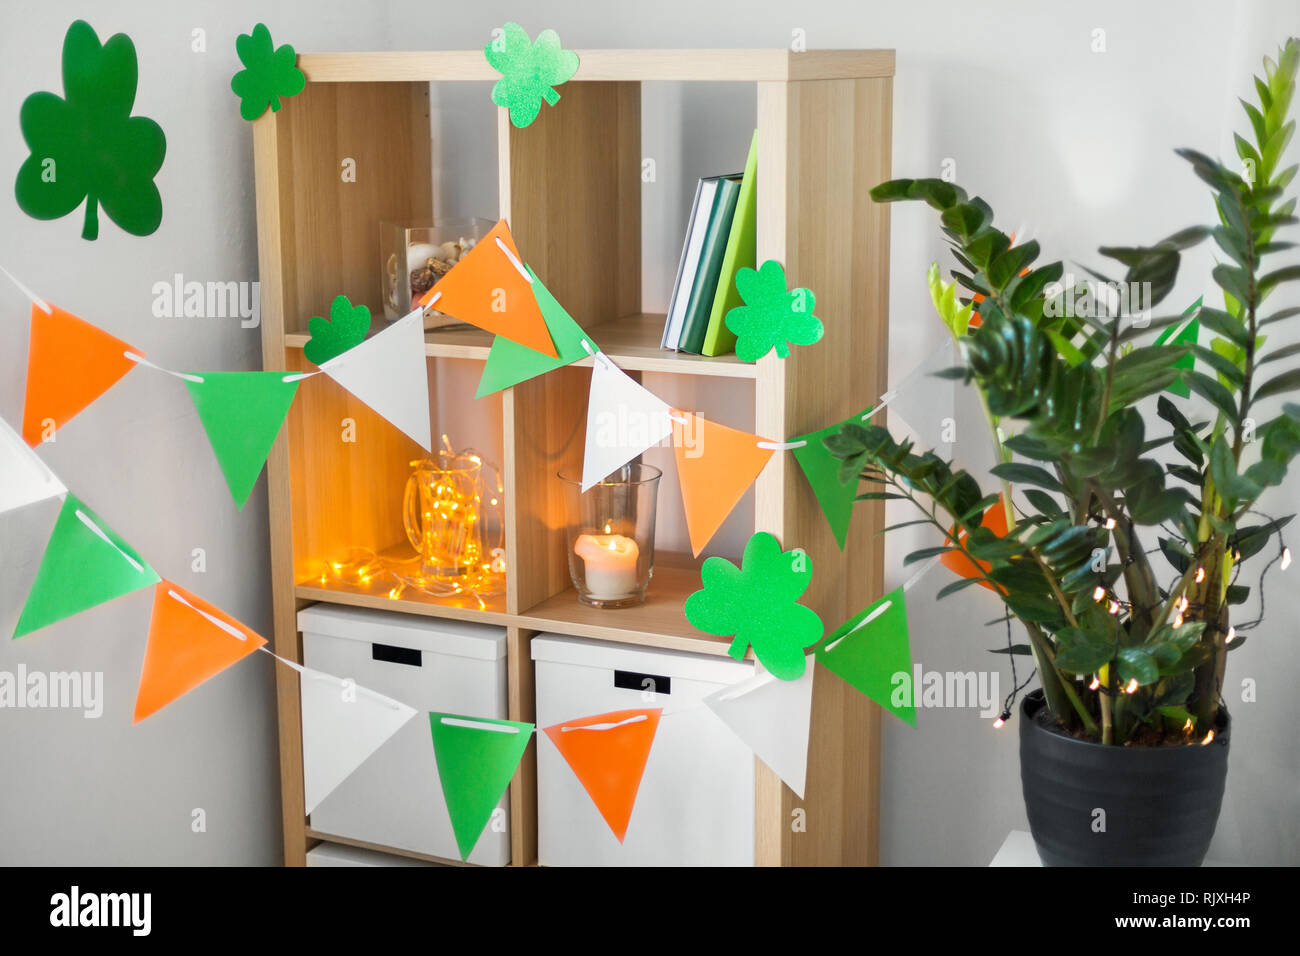 home interior decorated for st patricks day party Stock Photo